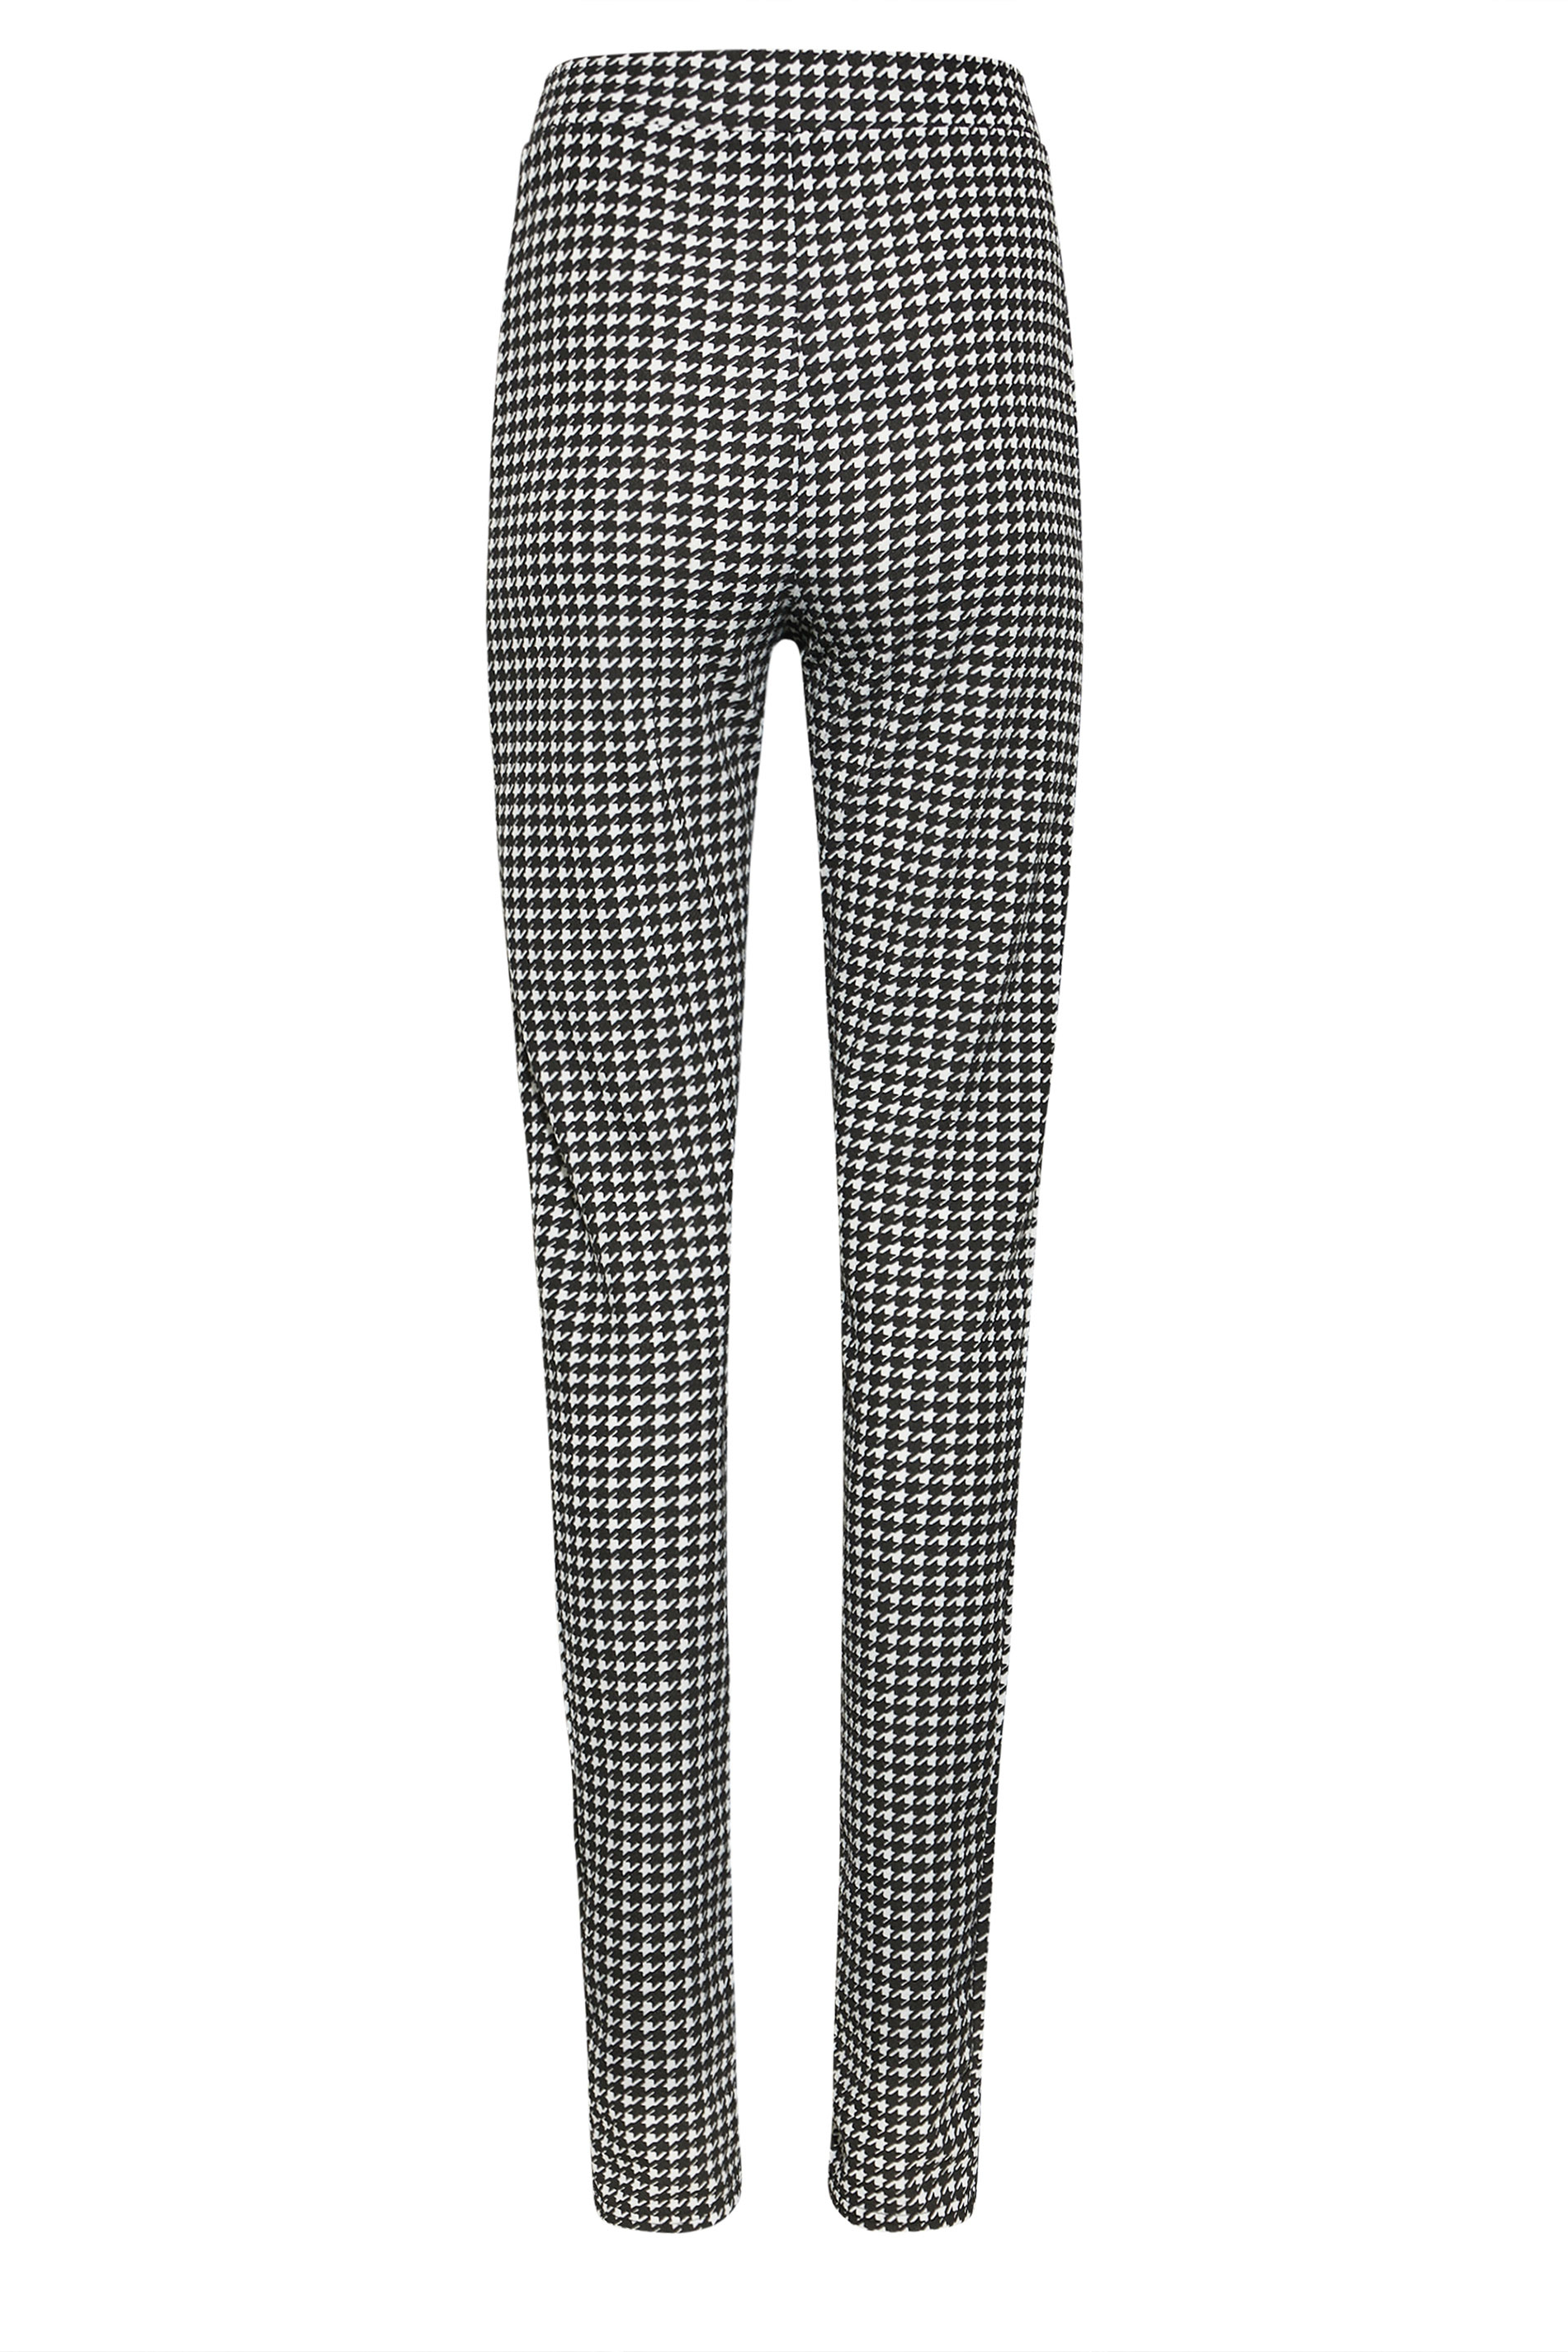 LTS Tall Black Dogtooth Check Trousers | Long Tall Sally